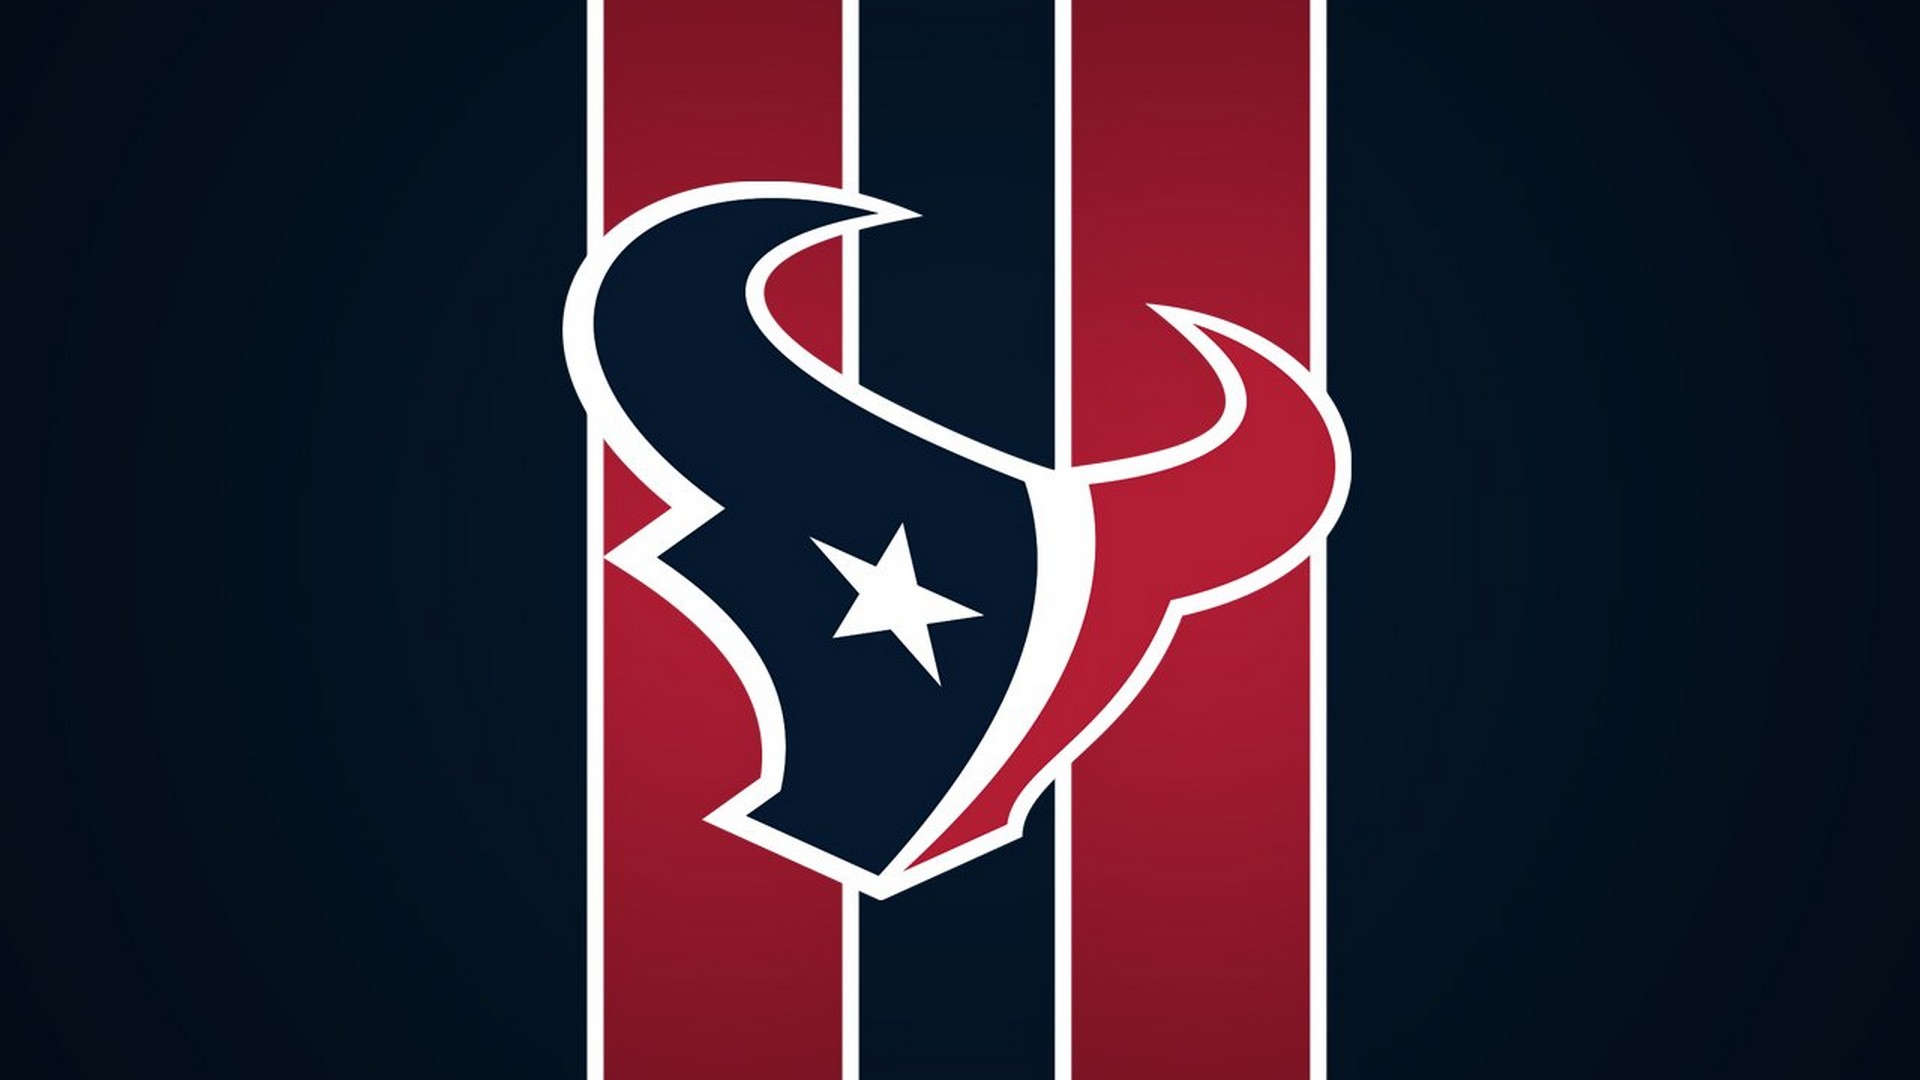 Backgrounds Houston Texans NFL HD With Resolution 1920X1080 pixel. You can make this wallpaper for your Mac or Windows Desktop Background, iPhone, Android or Tablet and another Smartphone device for free